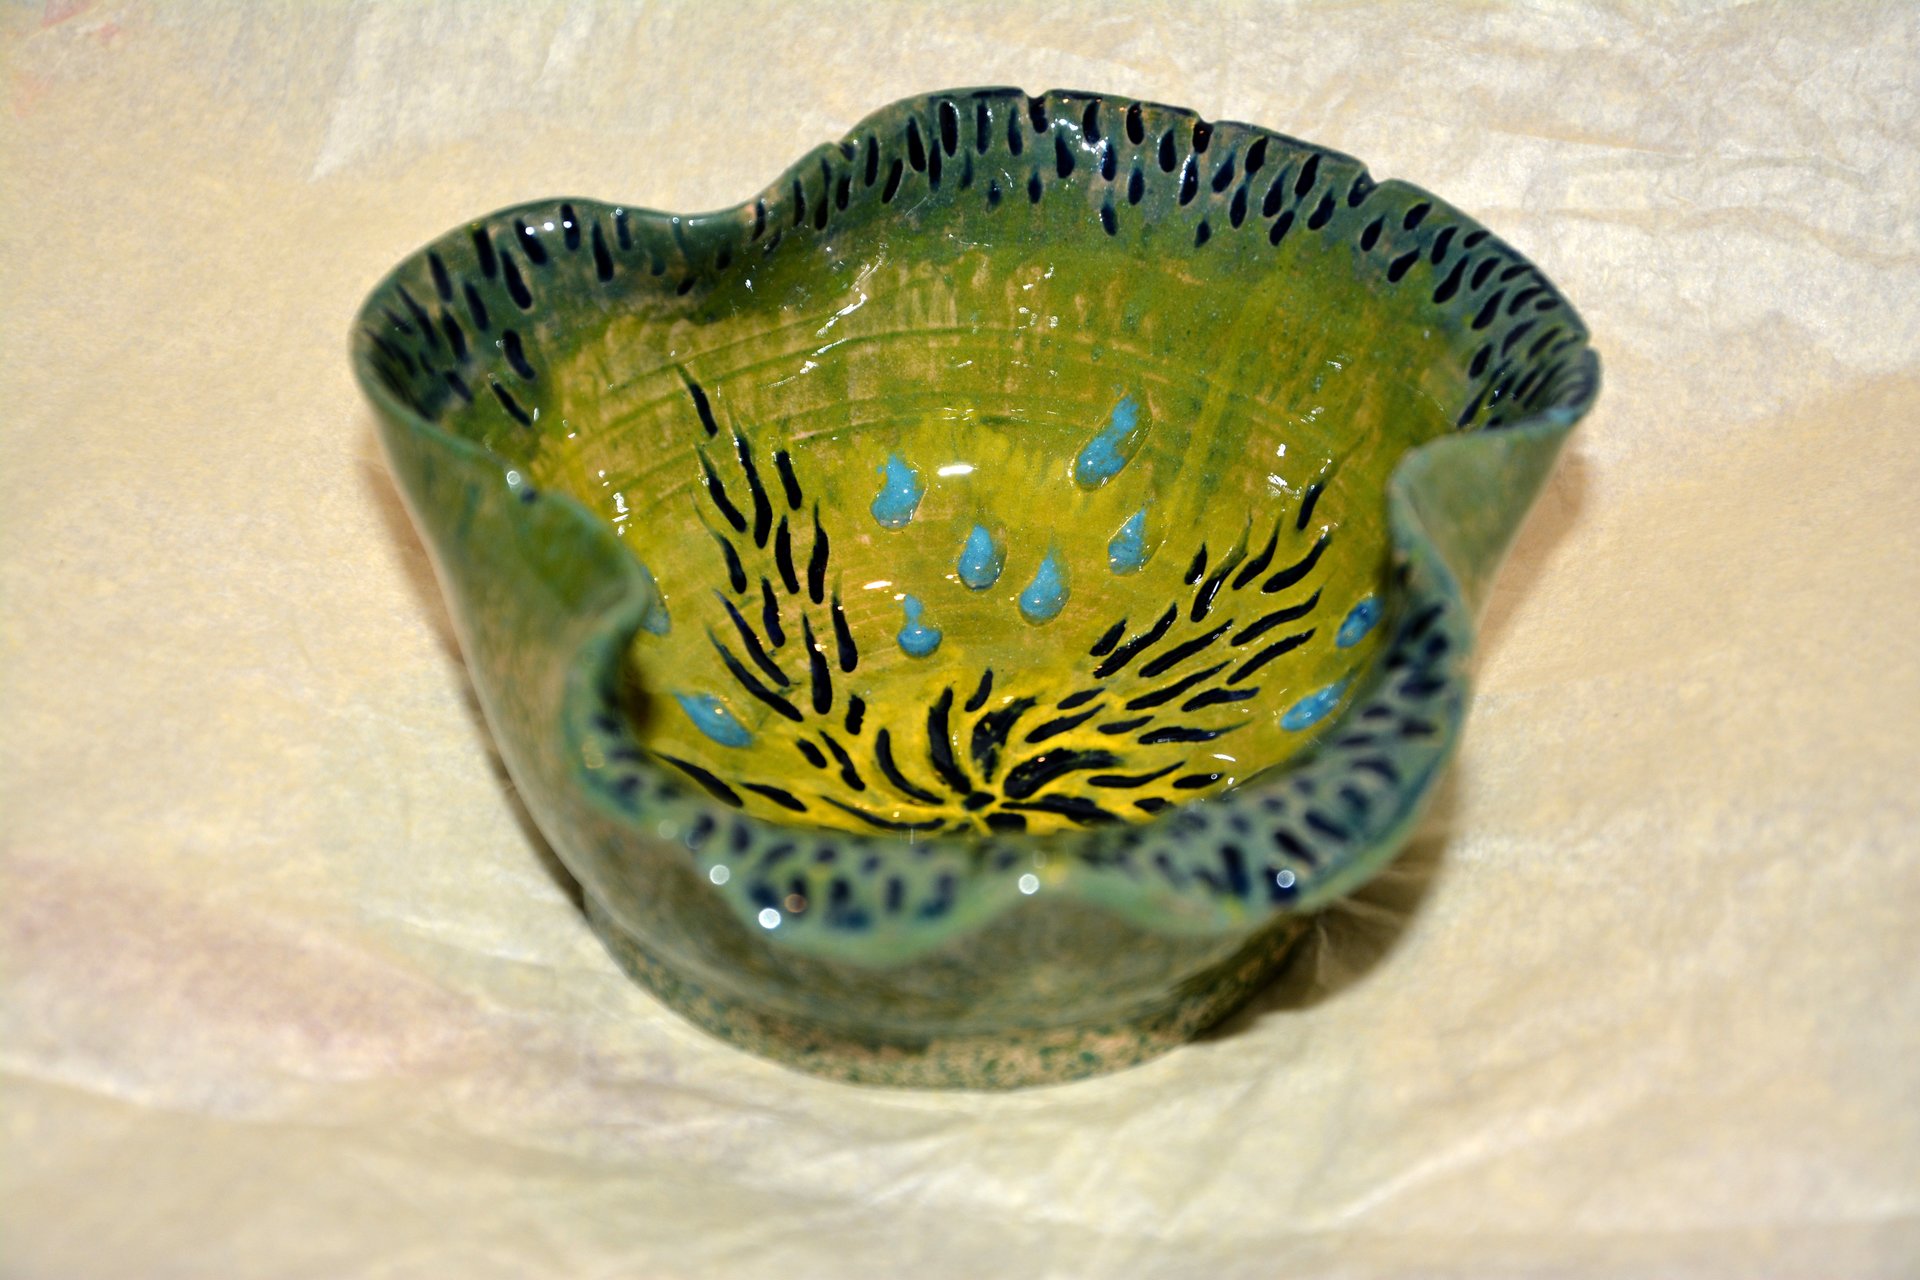 Green marine piala with a pattern of sea star - Pialy and sauceboats, height - 11 cm, width - 15 cm (extreme points), diameter of the bottom - 8 cm, photo 1 of 3.